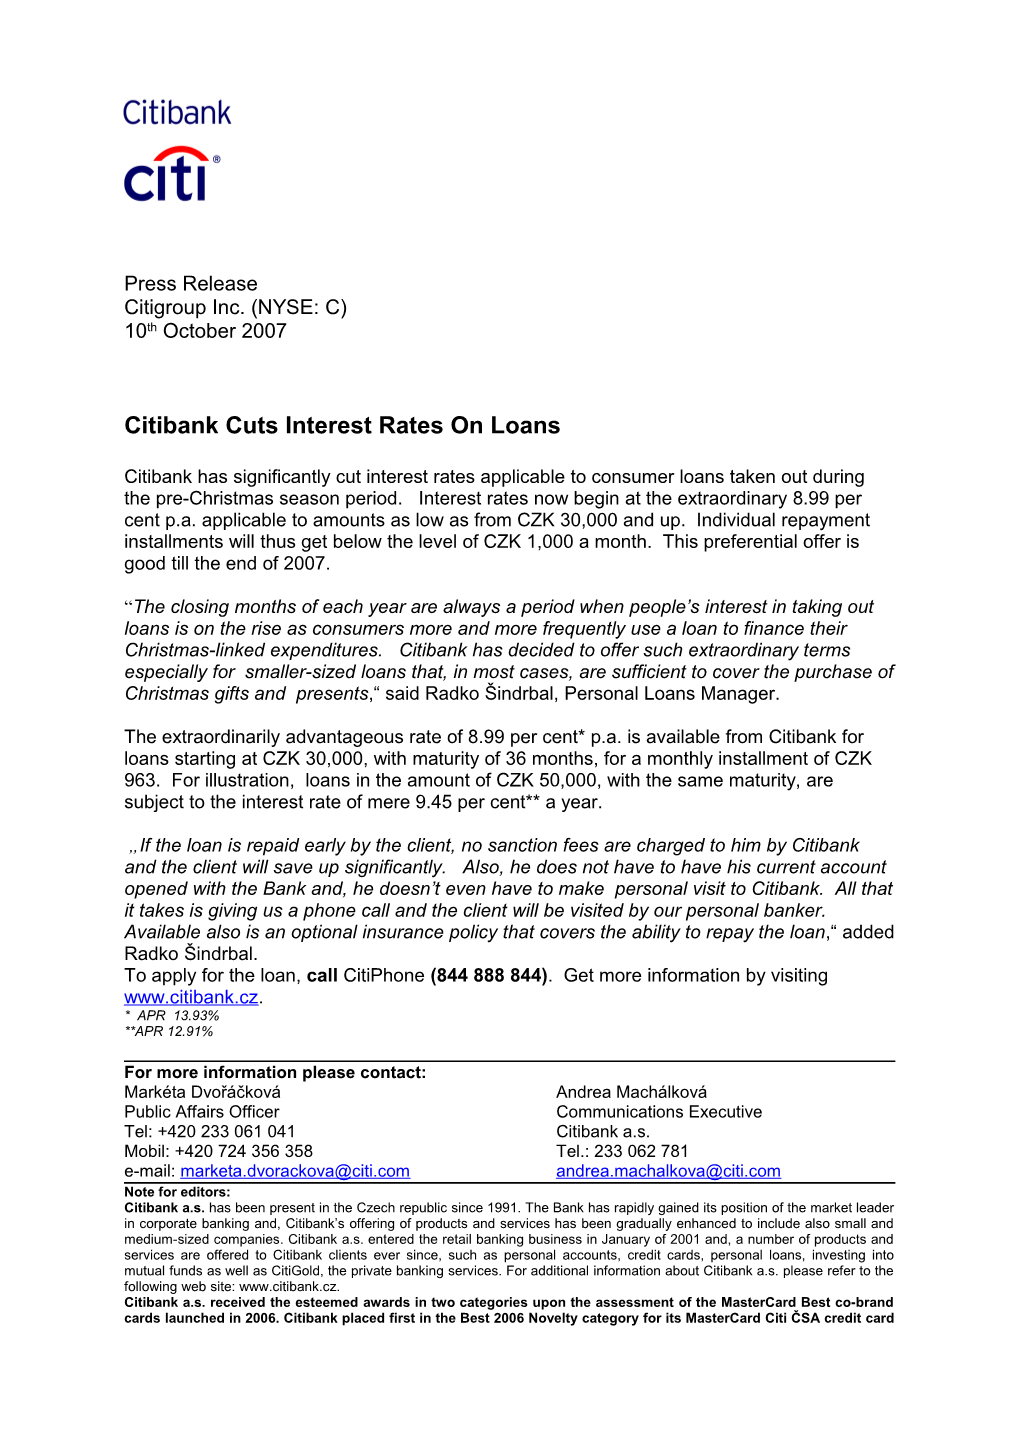 Citibank Cuts Interest Rates on Loans